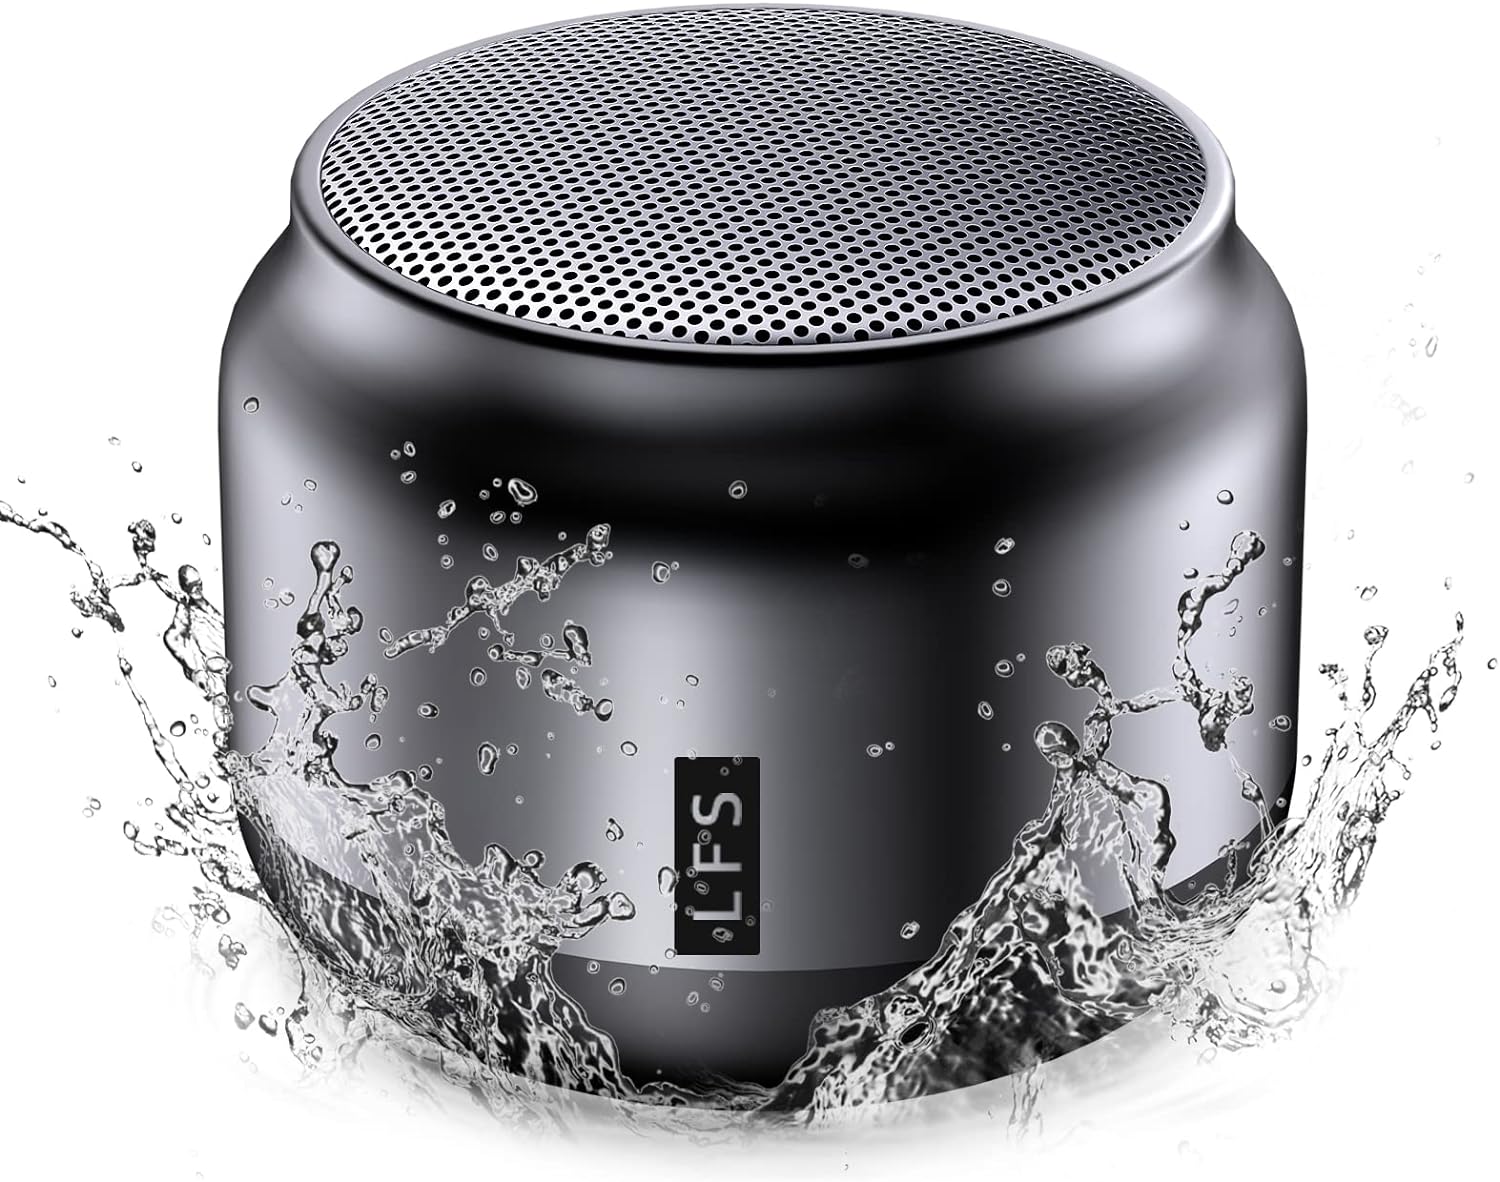 LFS Portable Bluetooth Shower Speaker, Waterproof Outdoor Wireless Speaker, Ultra-Long Play Time 15 Hours, TWS Pairing, Suitable for Home, Pool, Beach, Boating, Hiking, Camping